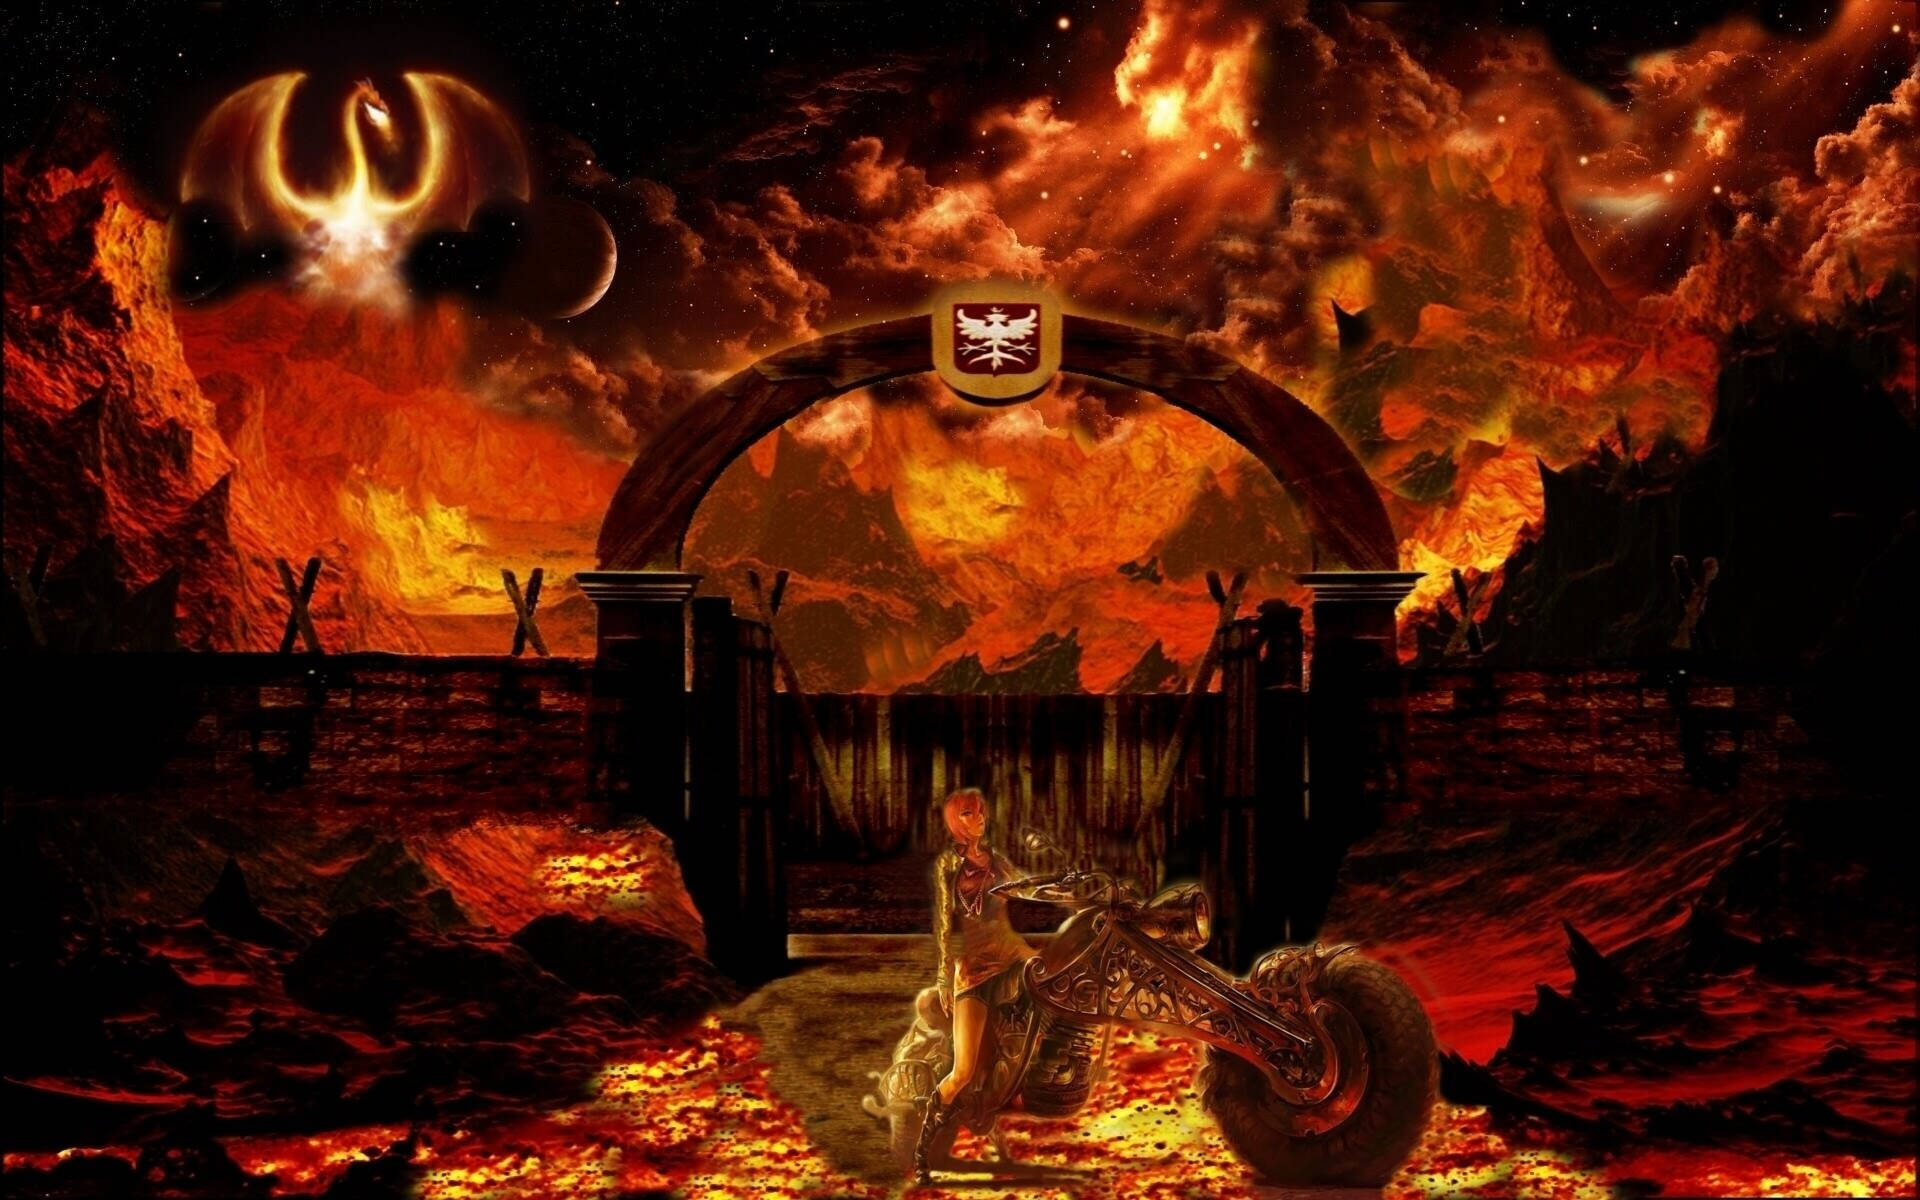 "Welcome to the depths of Hell" Wallpaper